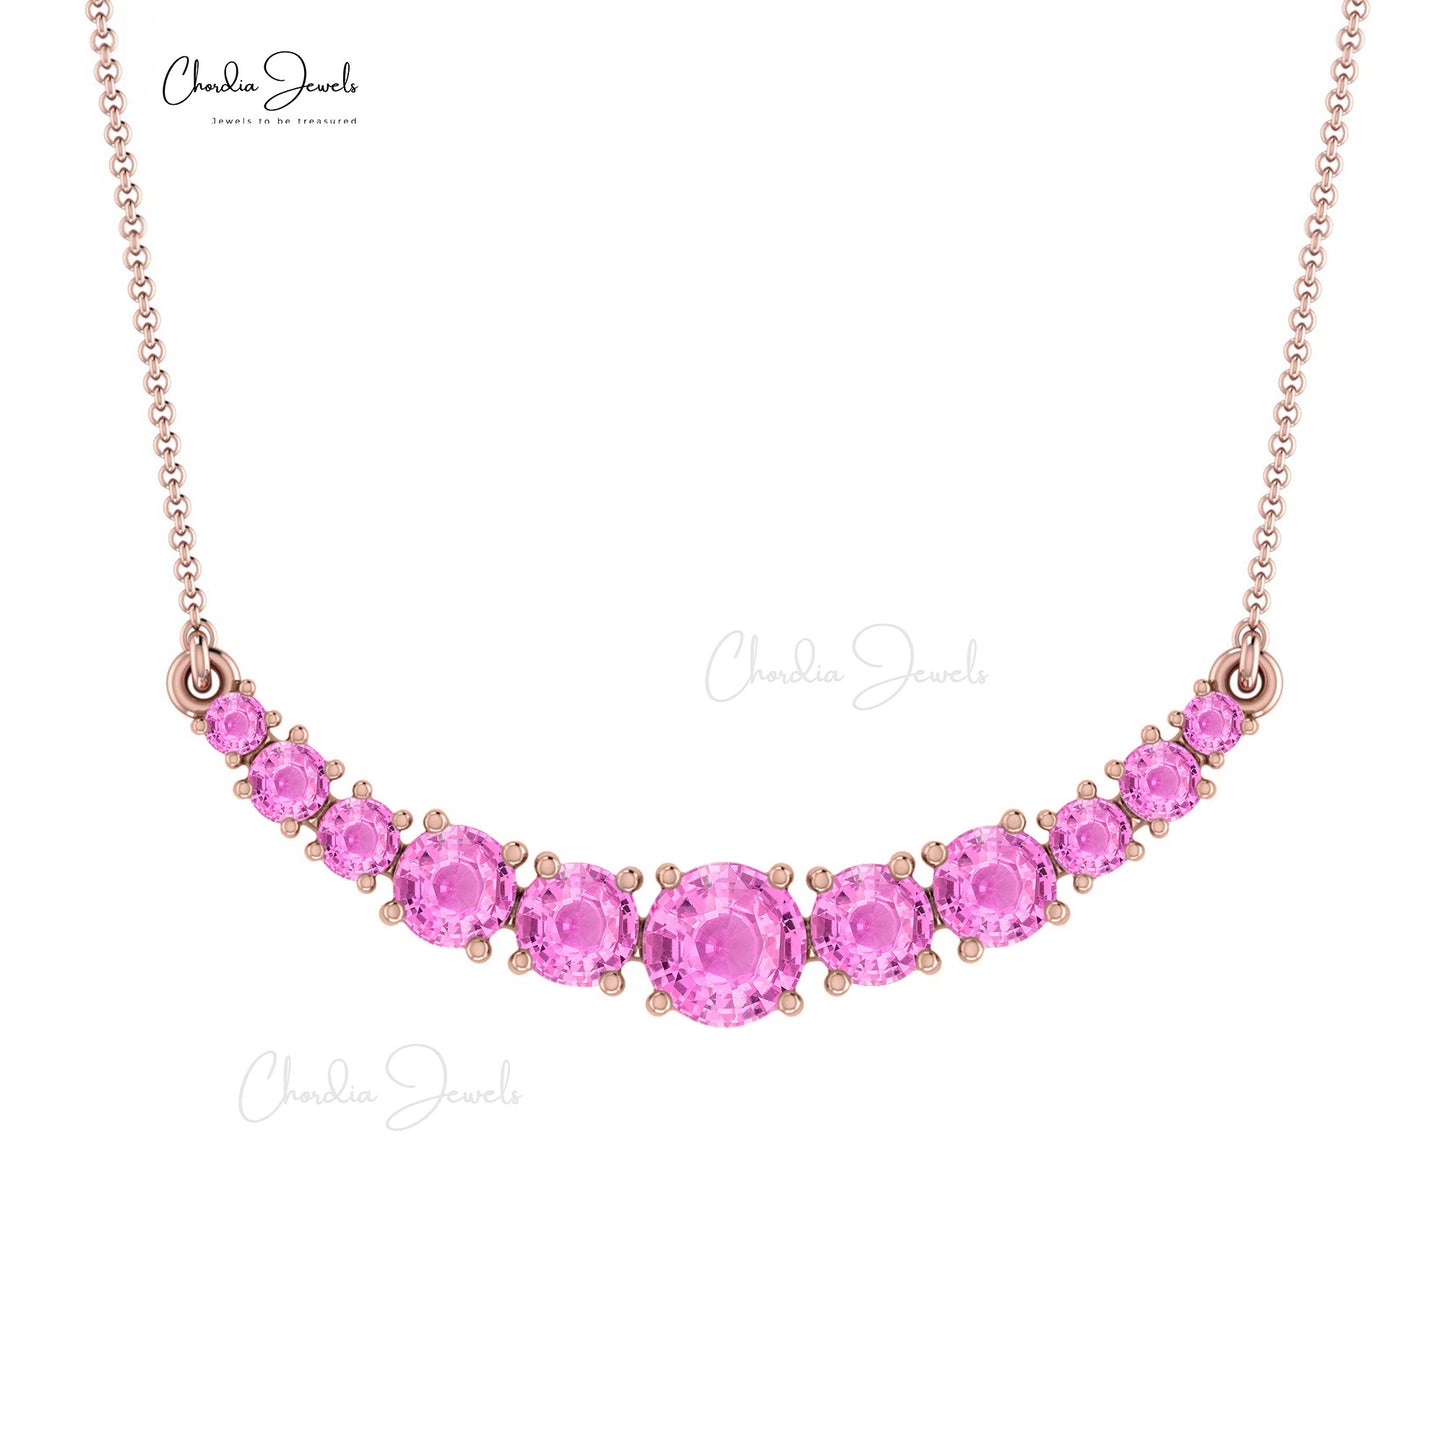 Natural Pink Sapphire Necklace, 1.19 Carat Round Faceted Gemstone Neck